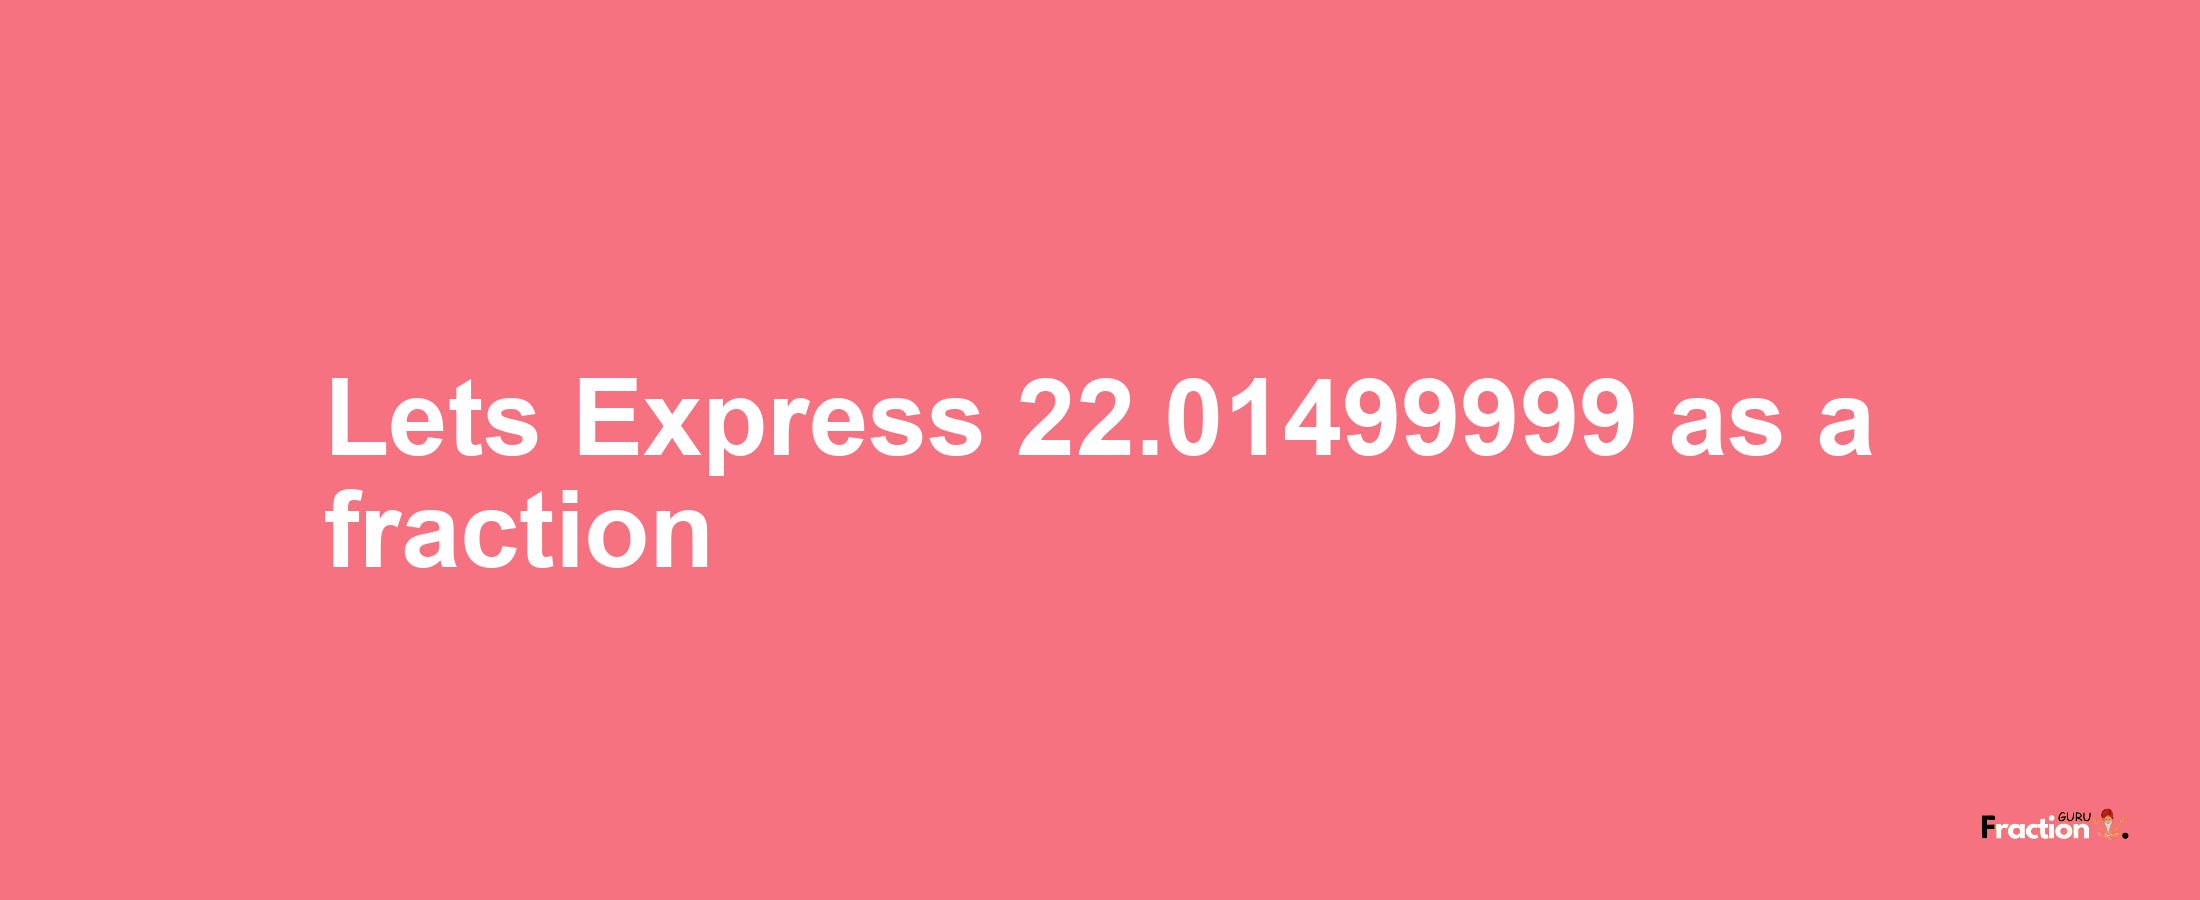 Lets Express 22.01499999 as afraction